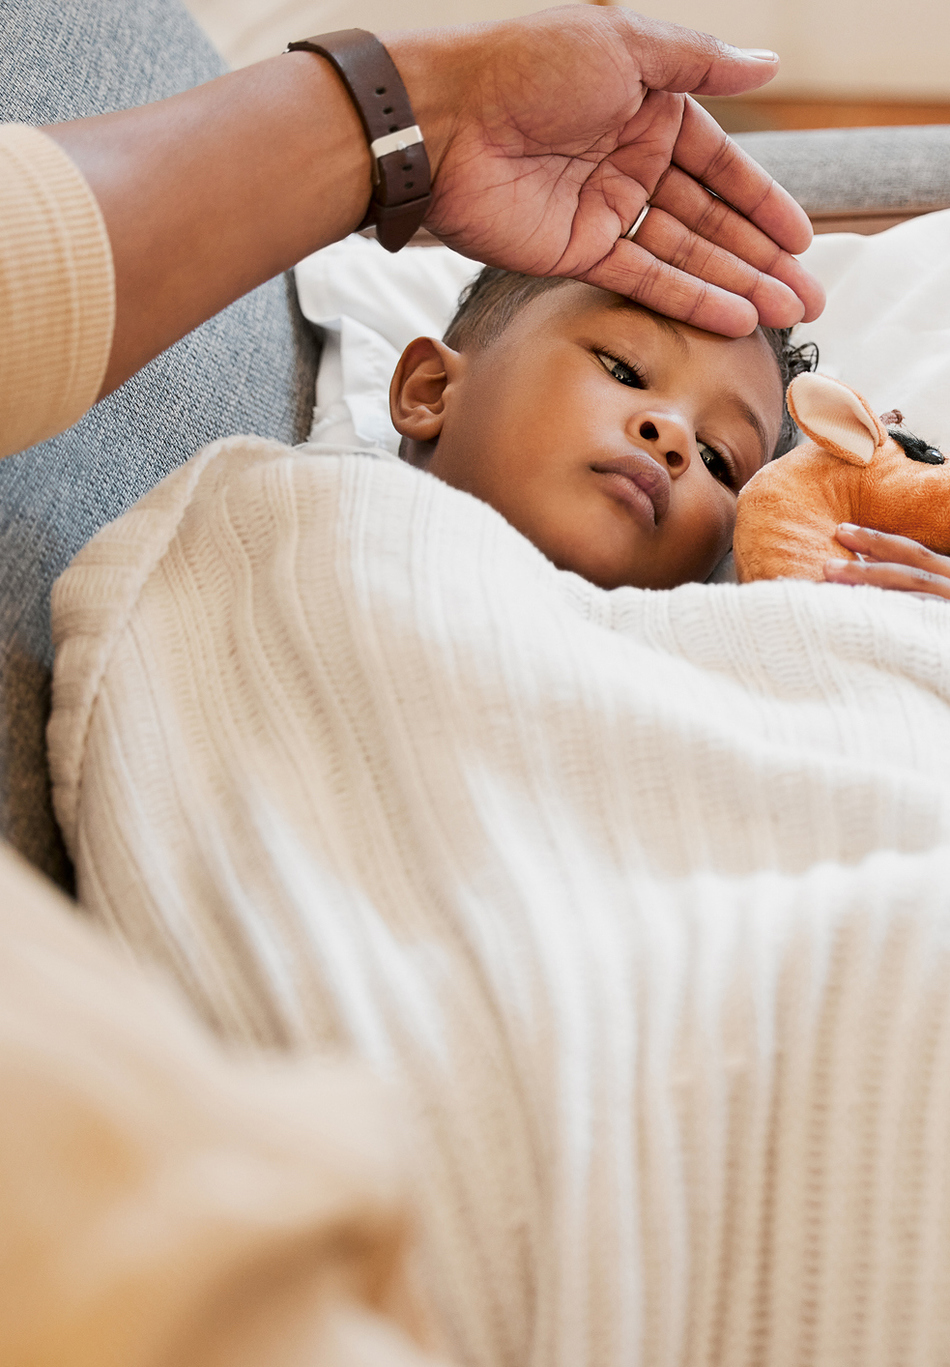 How to Make Your Child Comfortable While They Recover From the Flu